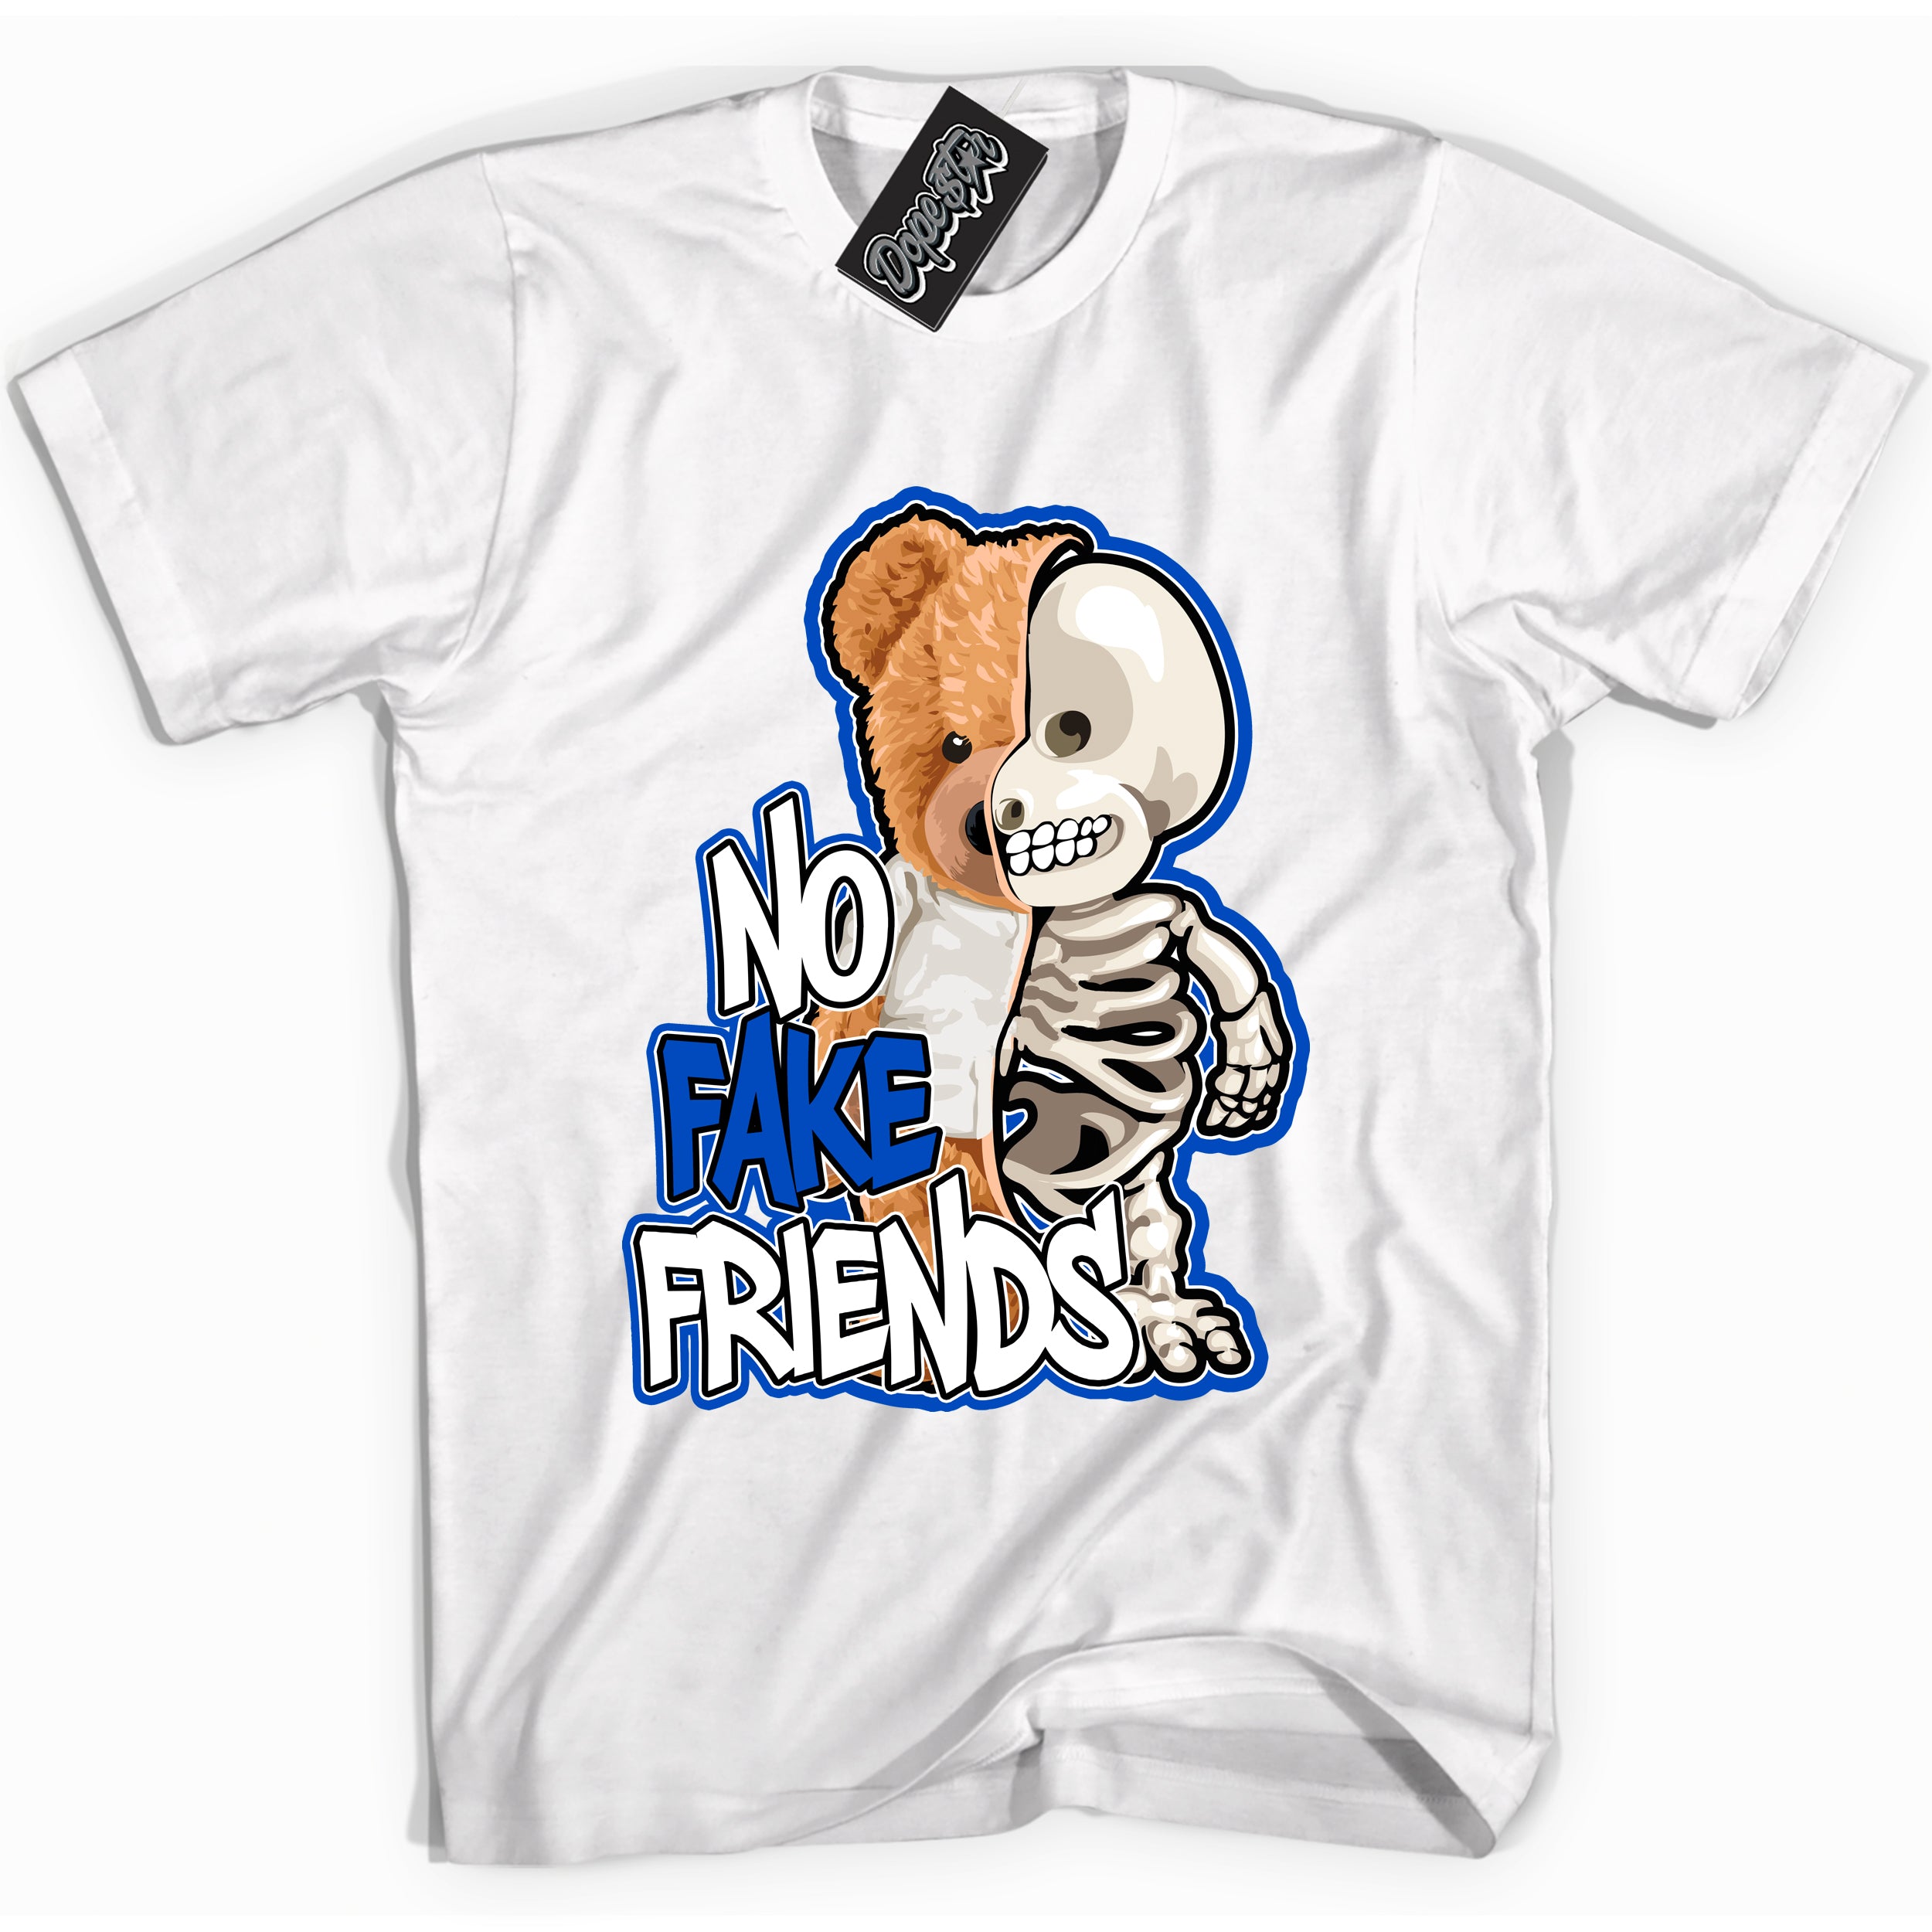 Cool White graphic tee with No Fake Friends print, that perfectly matches OG Royal Reimagined 1s sneakers 